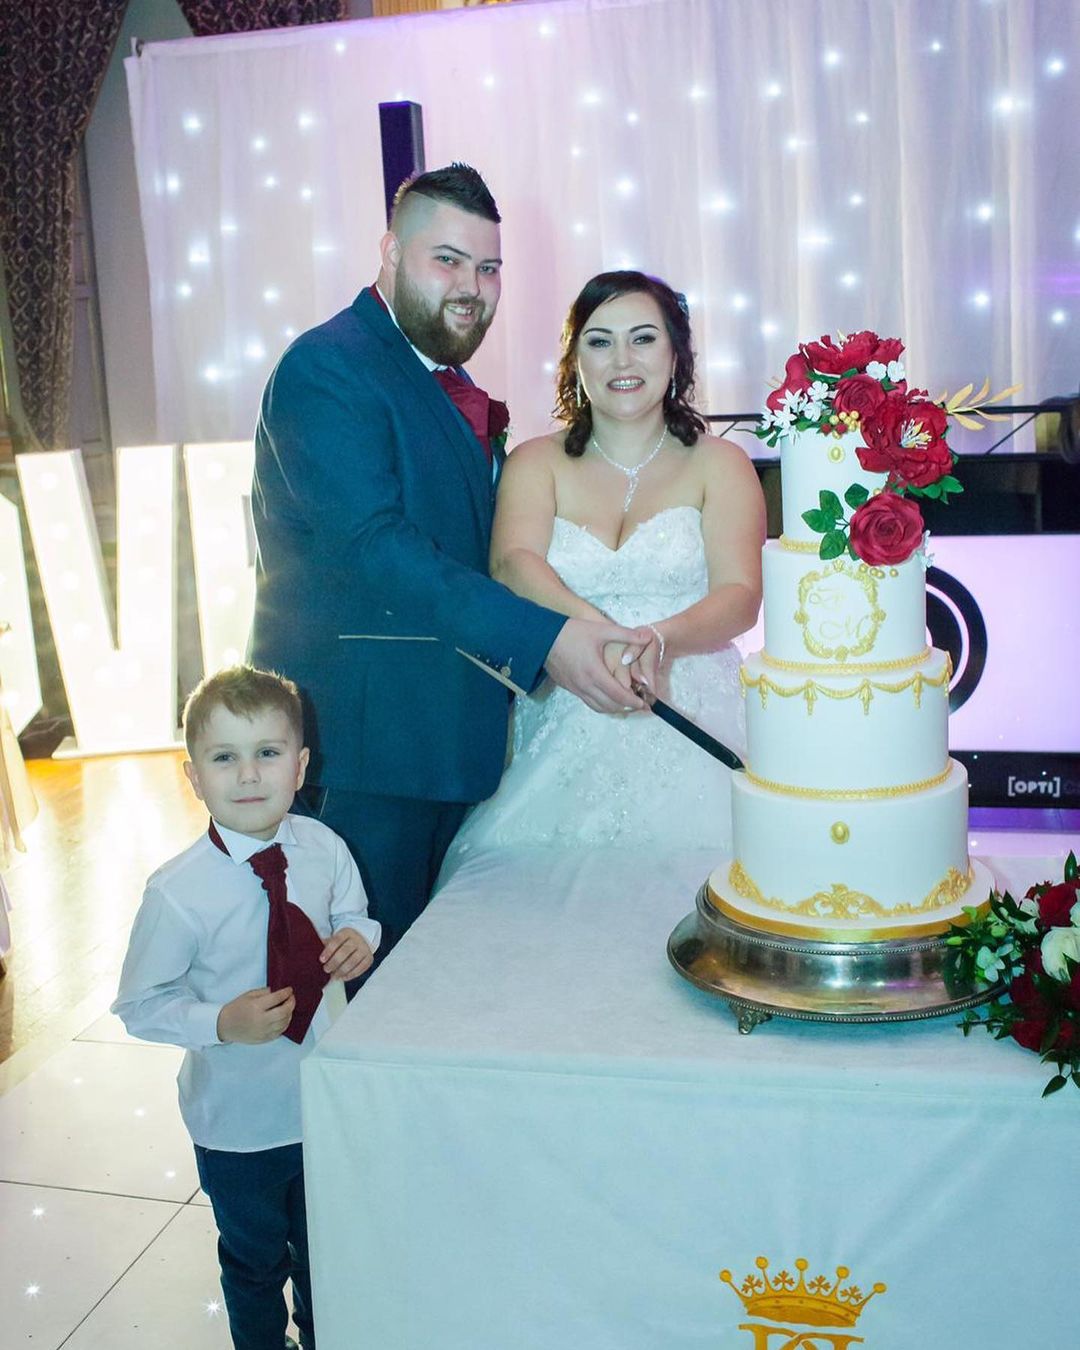 Michael Smith with wife and son cutting an anniversary cake